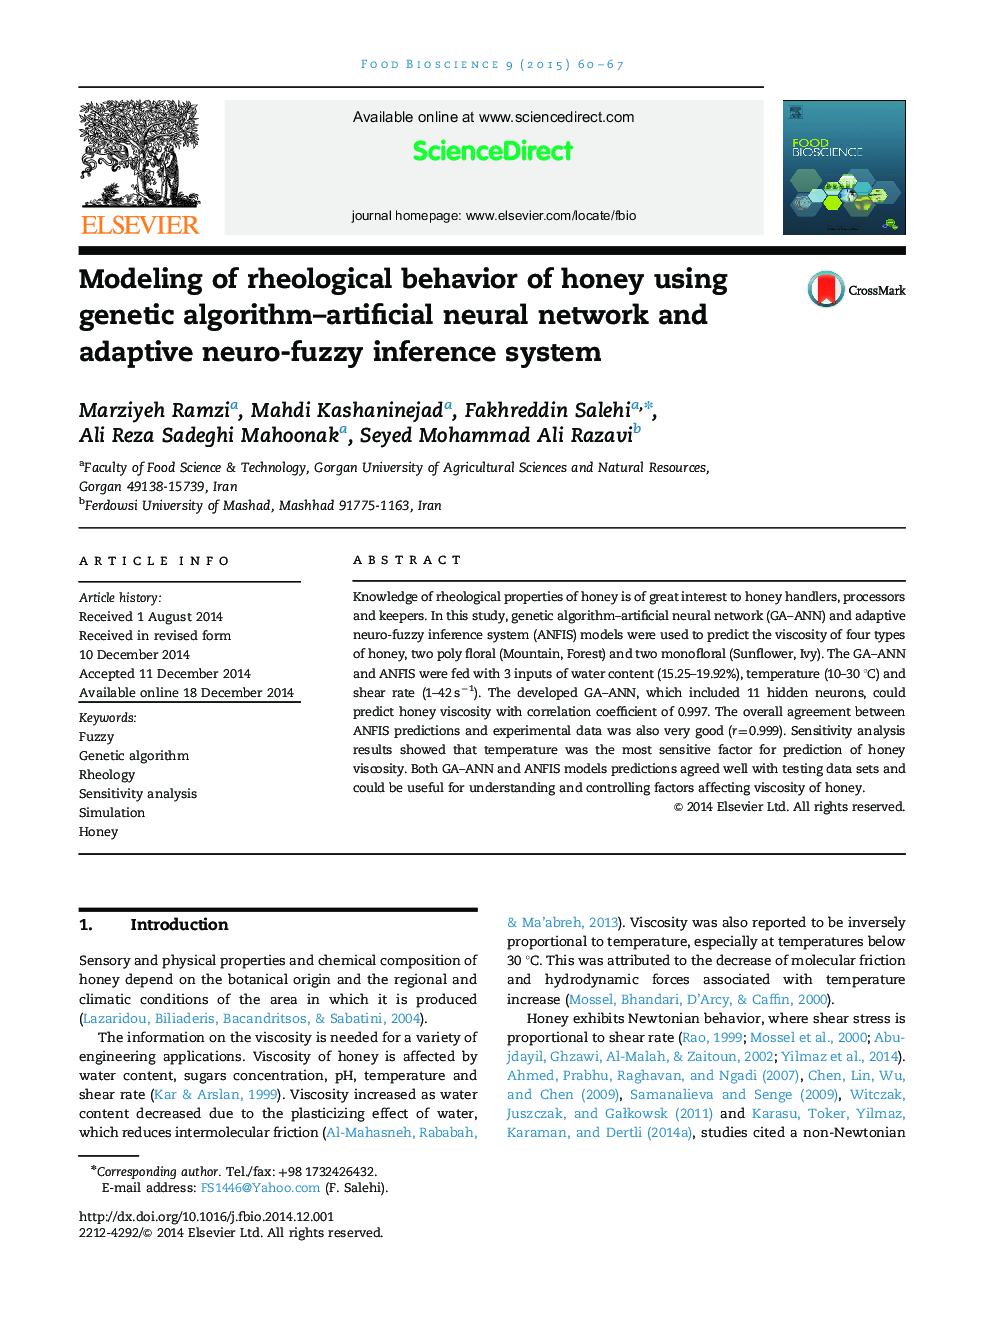 Modeling of rheological behavior of honey using genetic algorithm–artificial neural network and adaptive neuro-fuzzy inference system